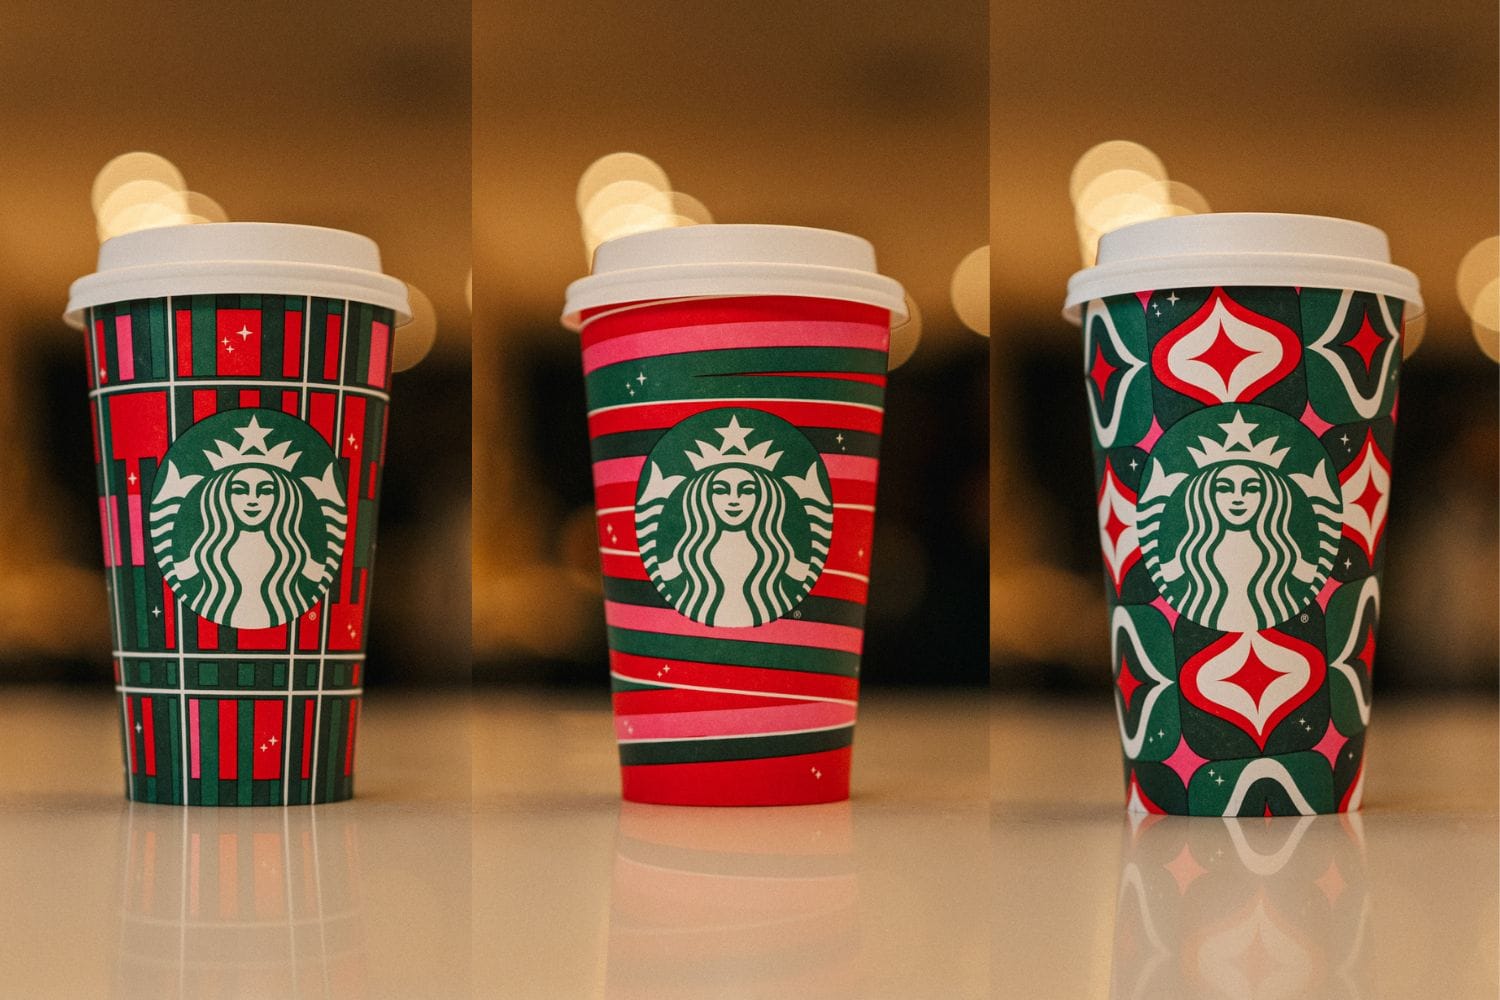 Starbucks Red Cup Day 2023: We now know the date for free reusable